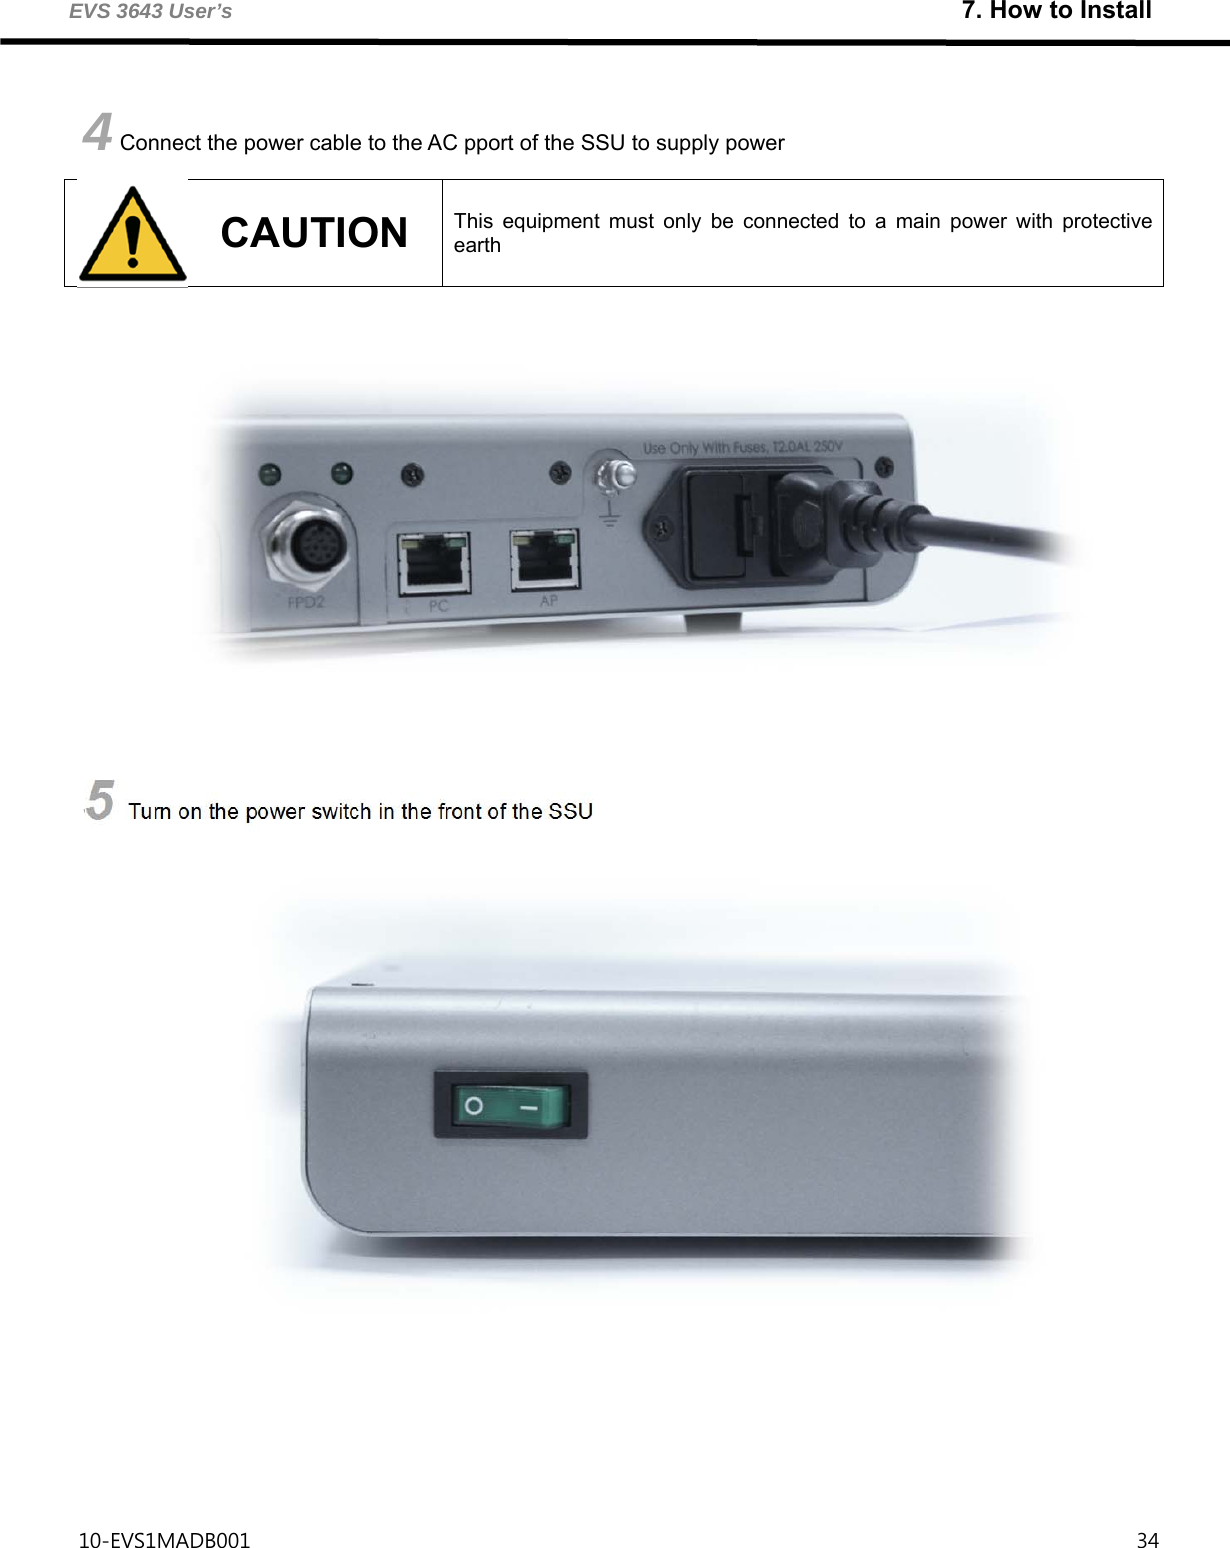 EVS 3643 User’s                                                                      7. How to Install 10-EVS1MADB001                                                                                     34          4 Connect the power cable to the AC pport of the SSU to supply power      5 Turn on the power switch in the front of the SSU      CAUTION This equipment must only be connected to a main power with protective earth 